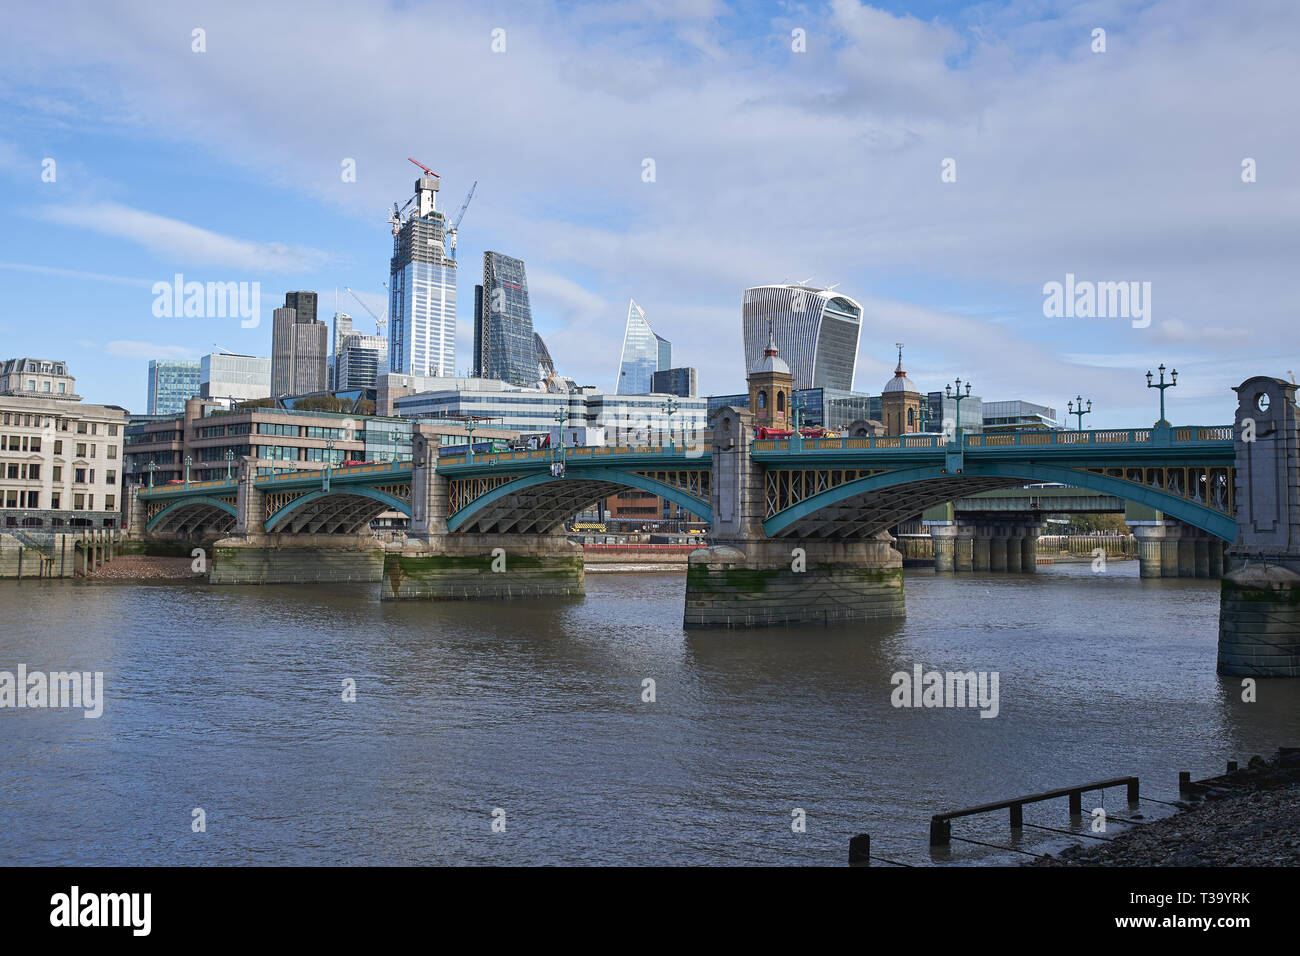 London, UK - December, 2018. New skyscrapers under construction in the City, the famous financial district of London. Stock Photo